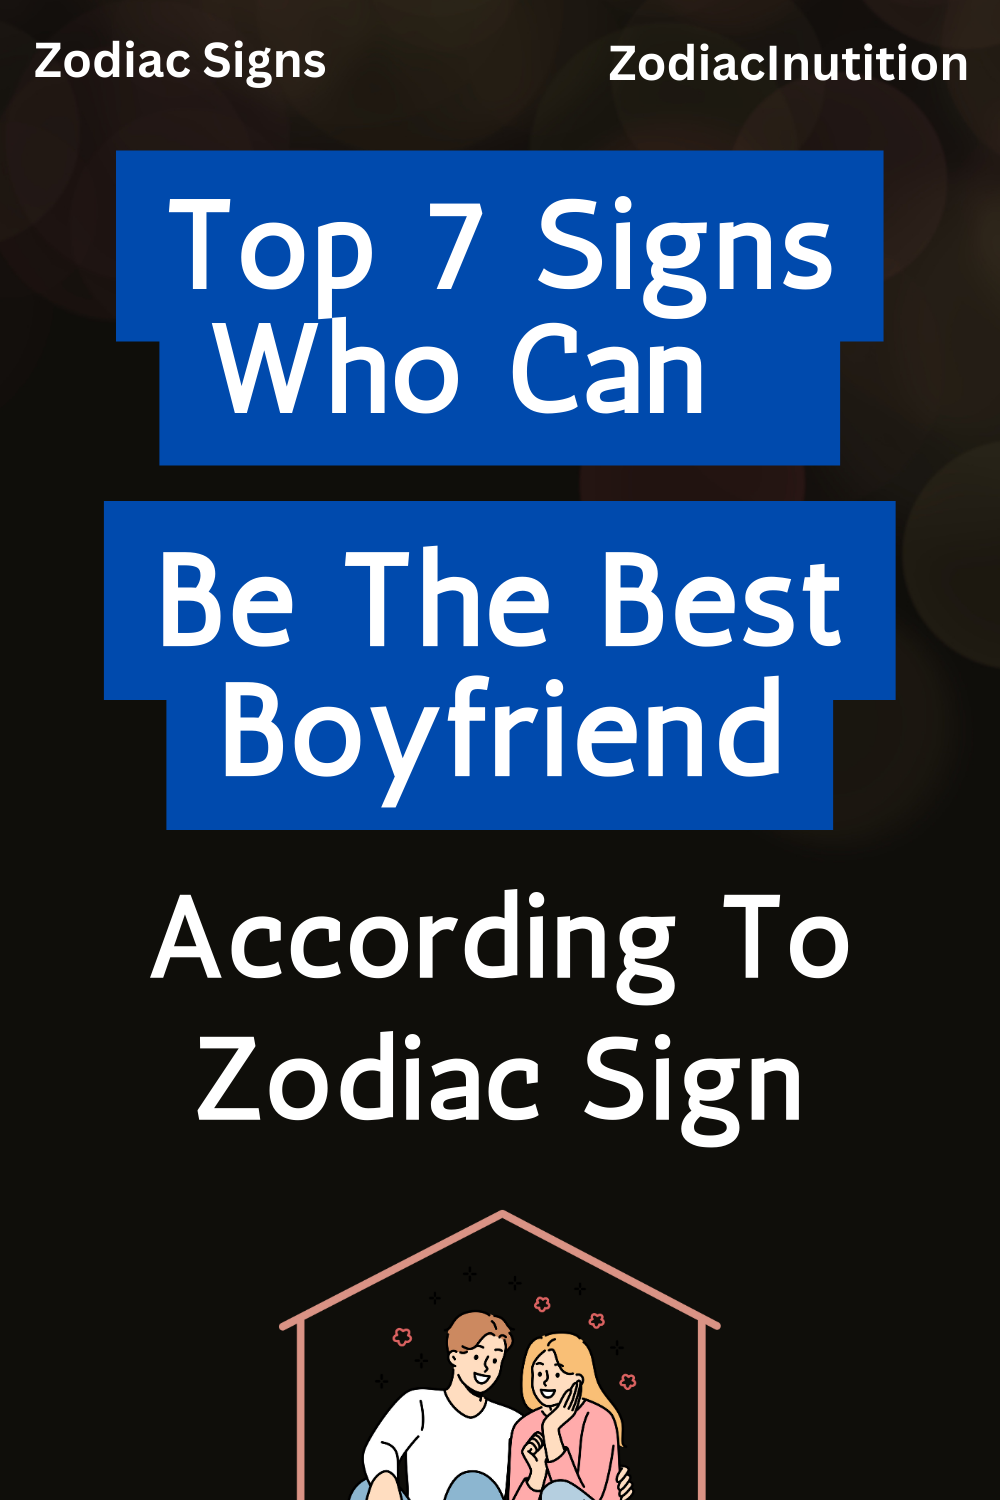 Top 7 Signs Who Can Be The Best Boyfriend According To Zodiac Sign